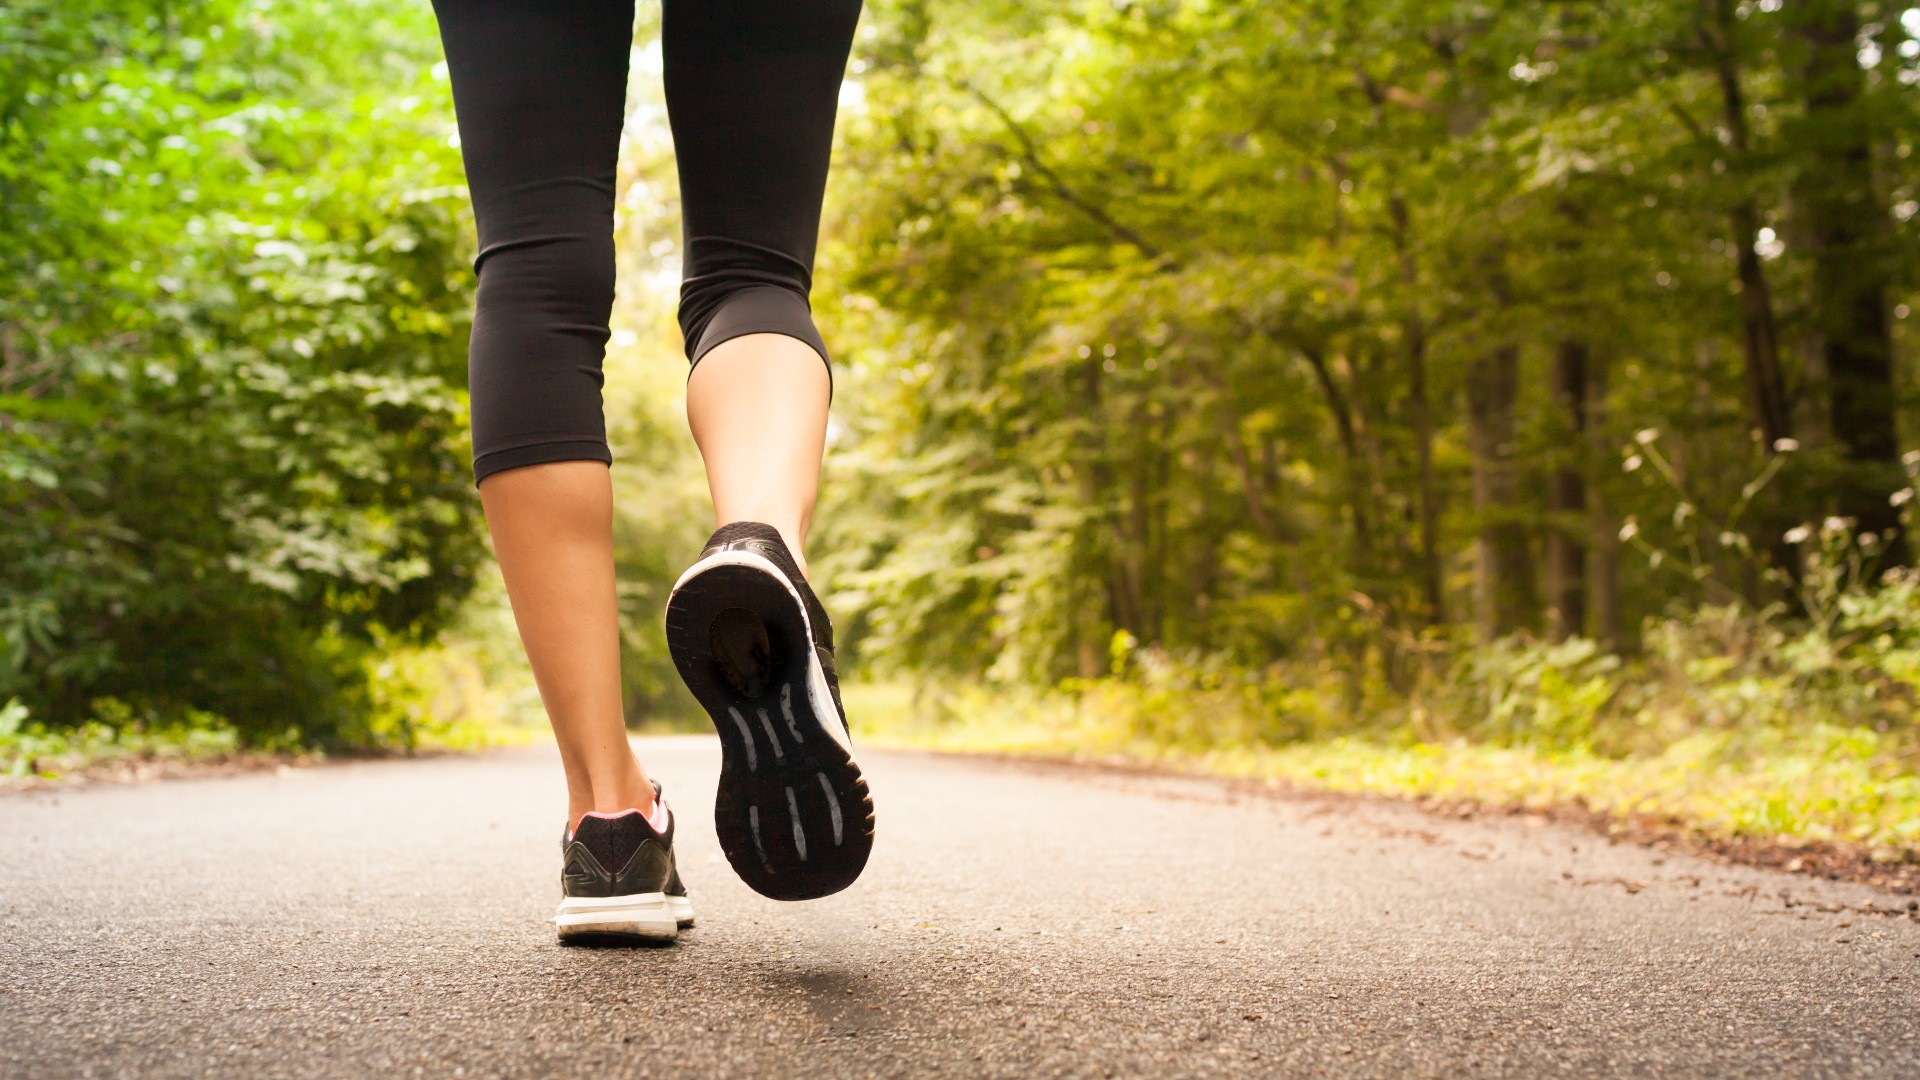 Walking is great for overall health and experts say it could even cause you to lose weight, depending on your baseline.